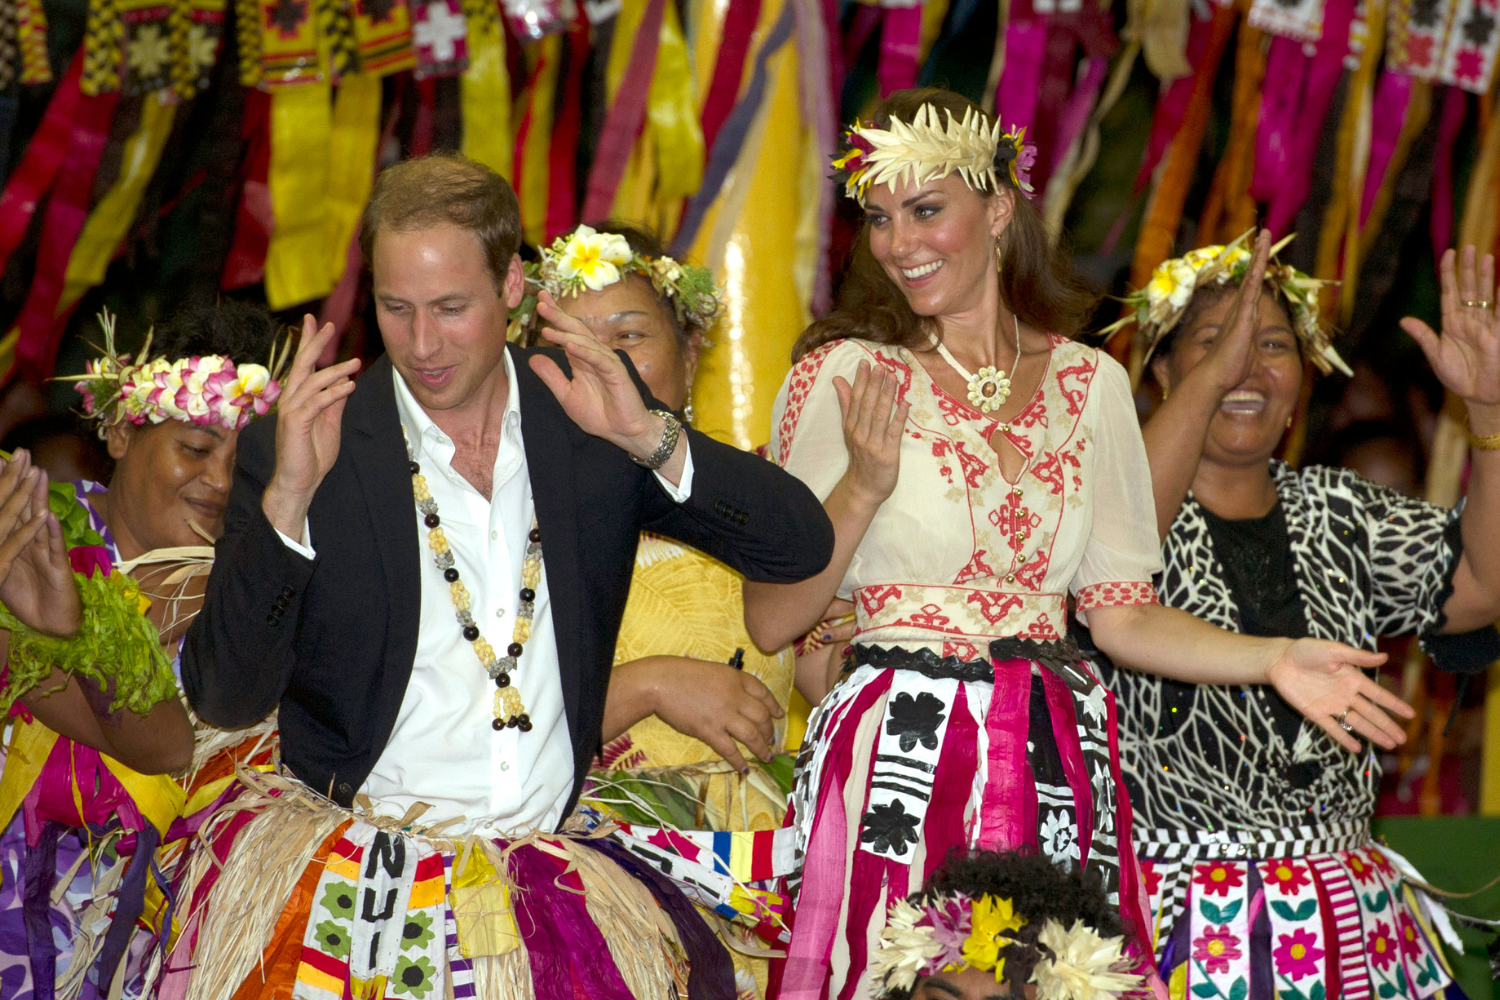 Watch Kate Middleton and Prince William's amazing dance moves on their epic royal tours. 8